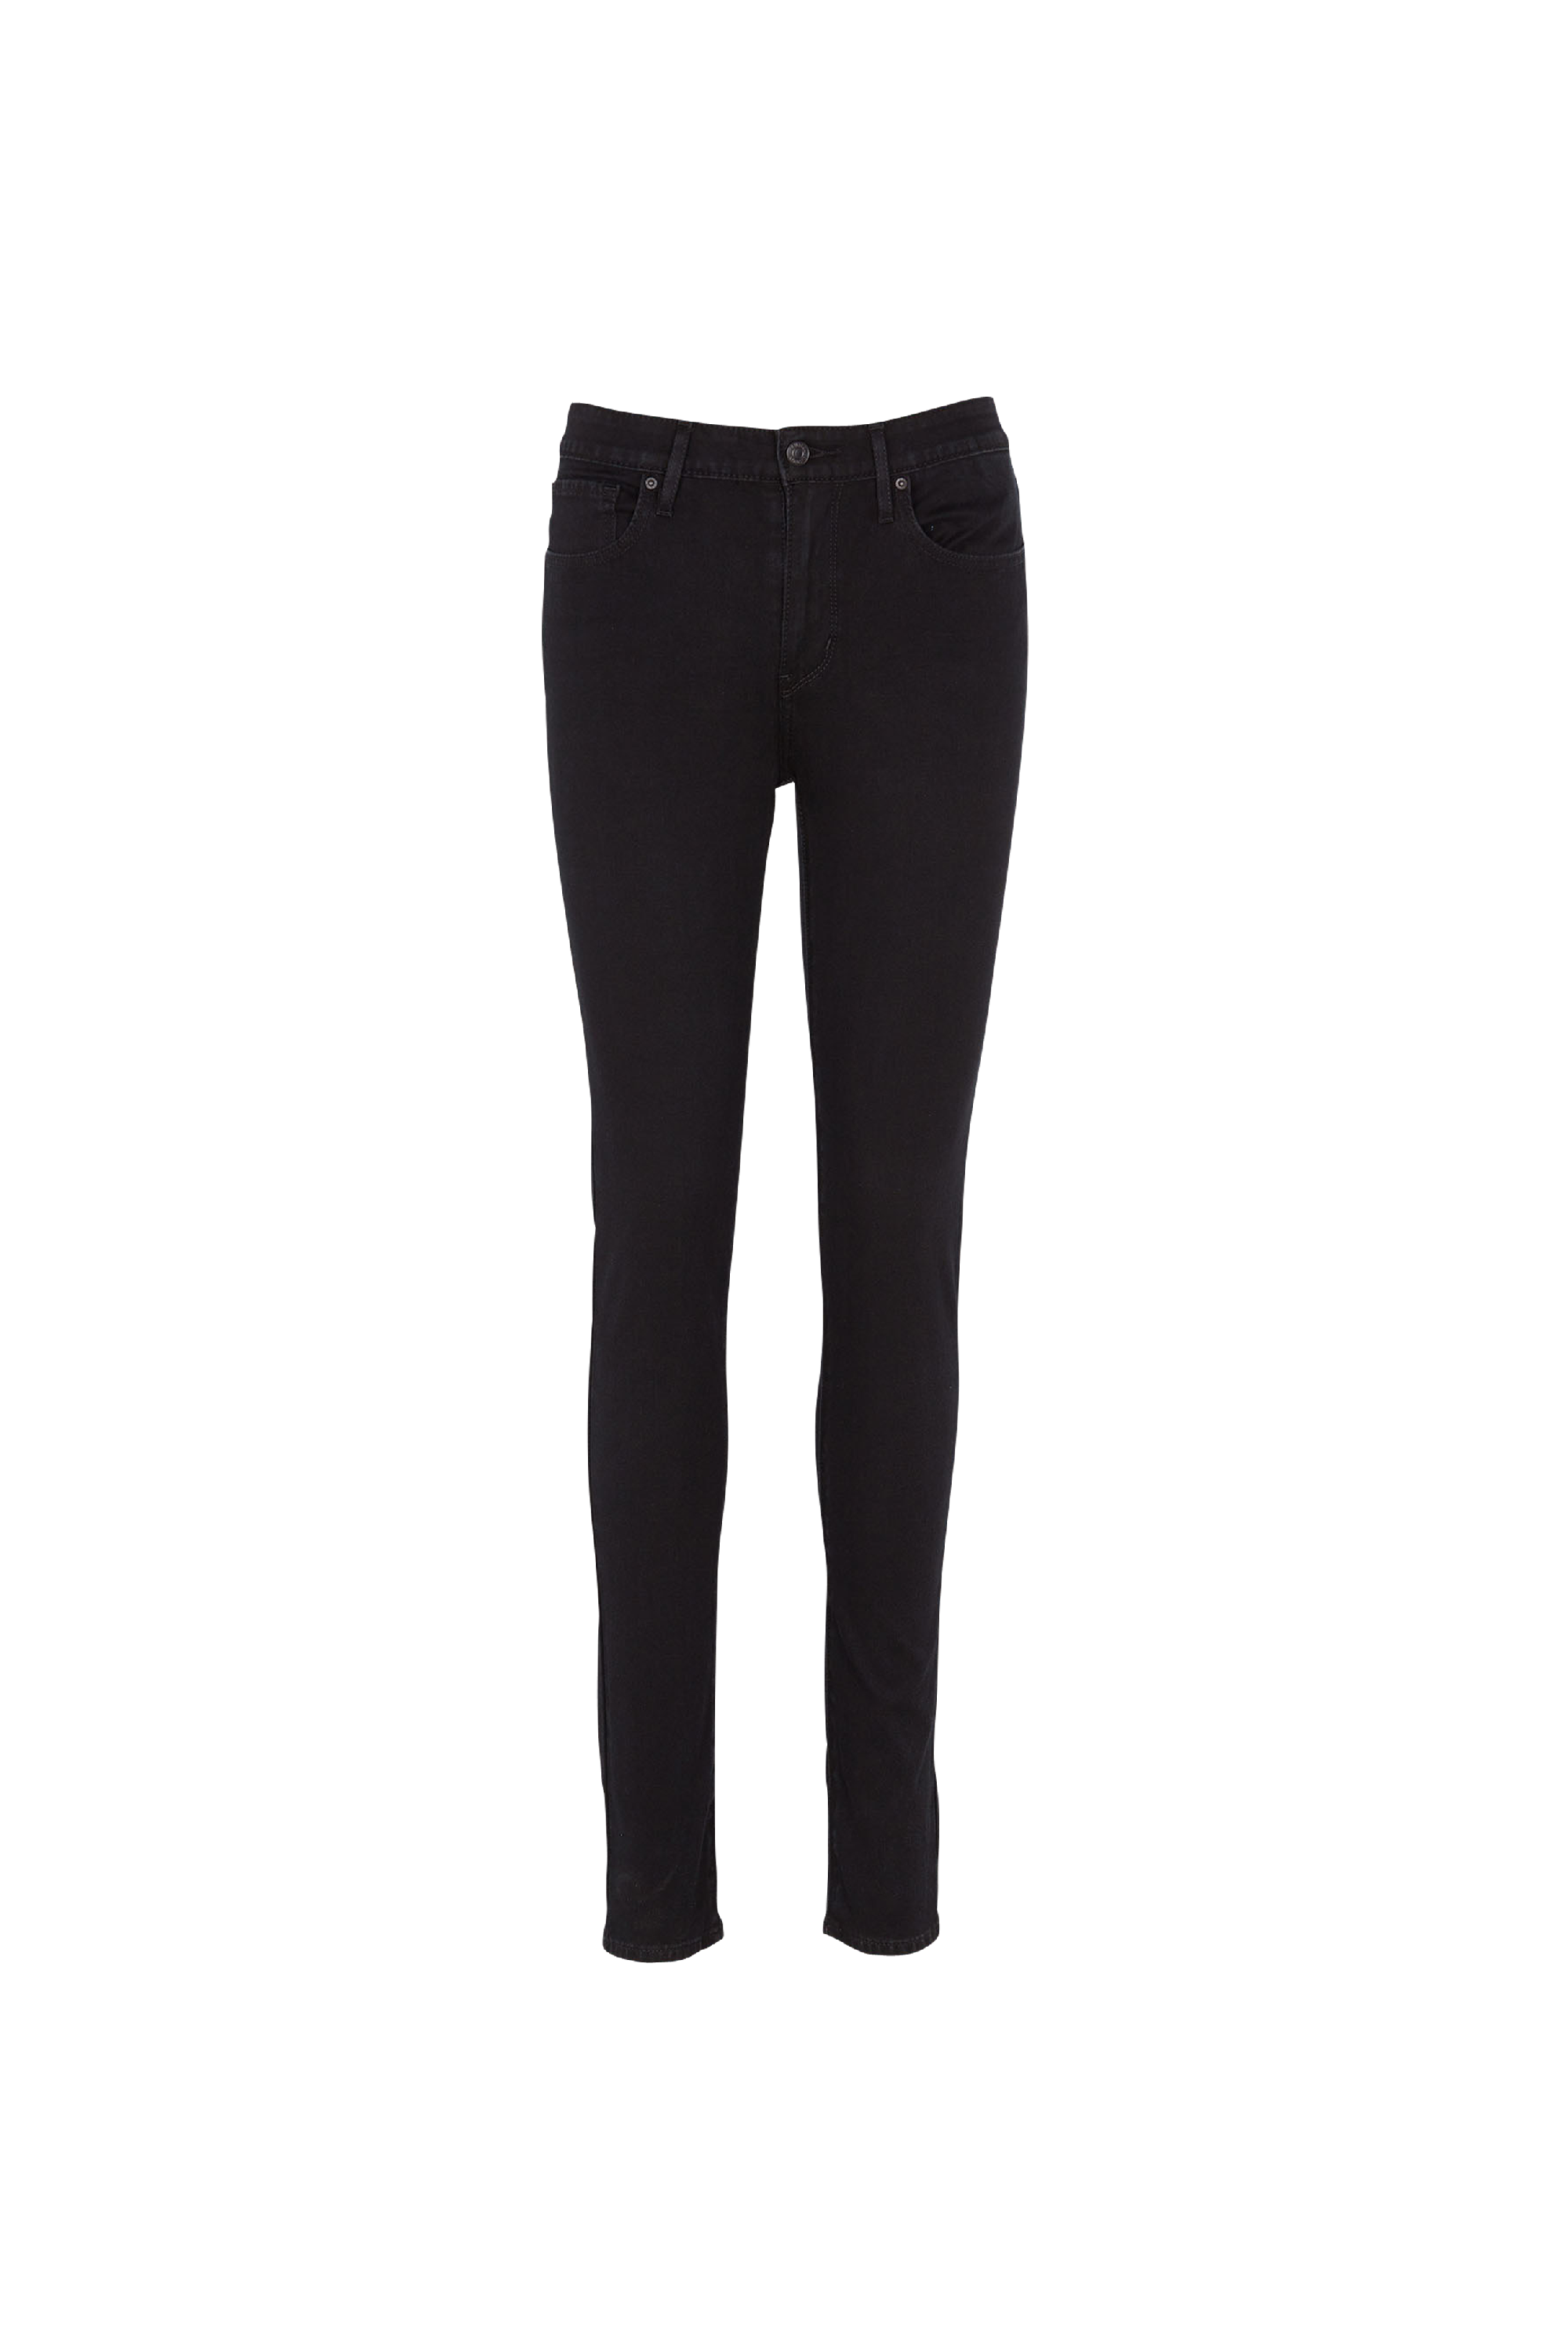 Levi's - Jean 721 Skinny Taille haute - Taille 28/30